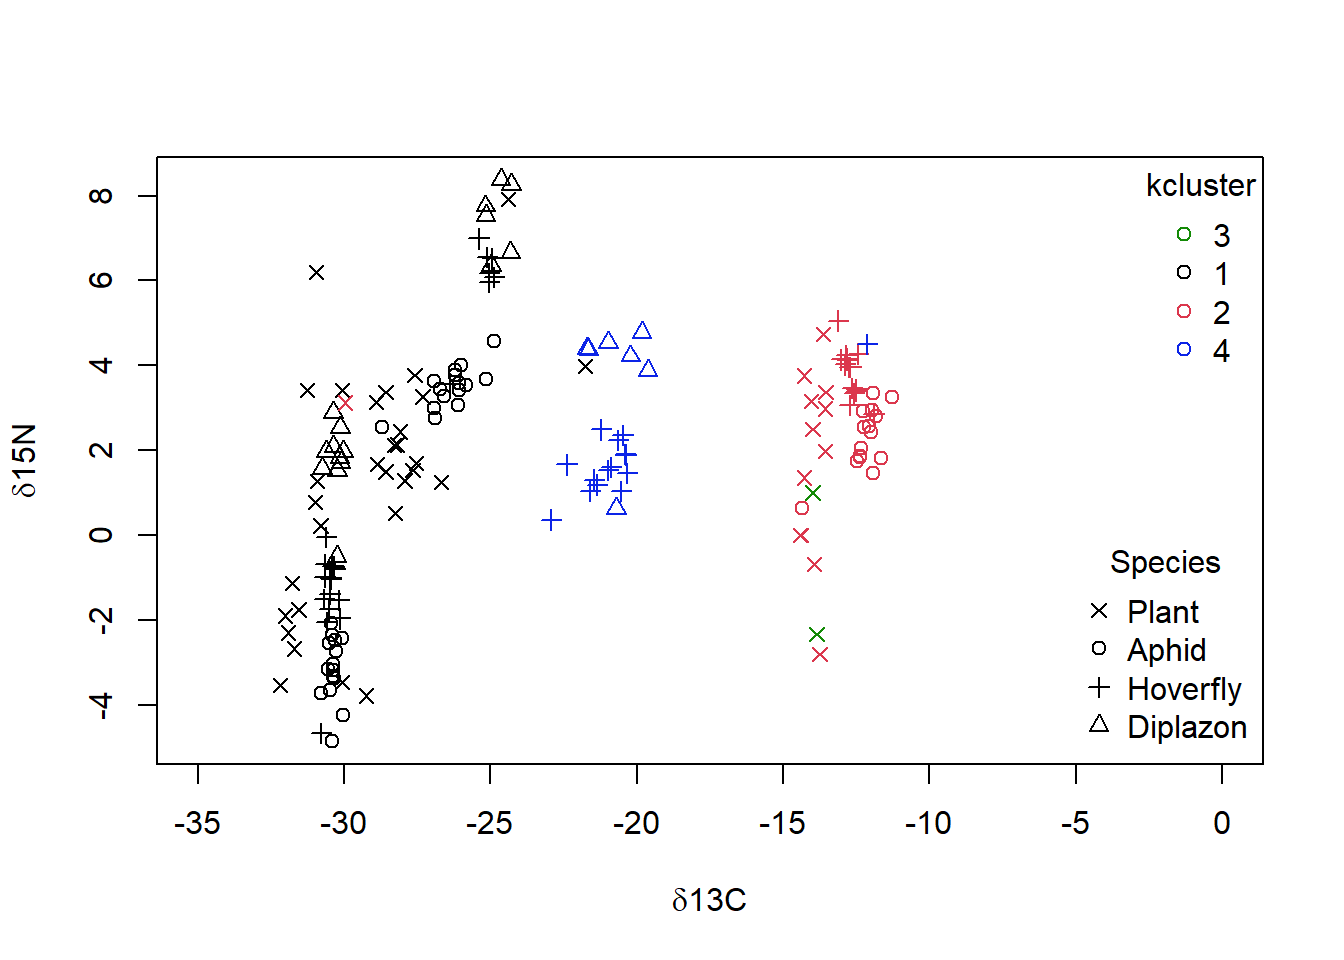 X-axis labelled 'd13C', y-axis labelled 'd15N'and two legends, one as 'kcluster' ranging from 1 to 4, and the second with 'Species'. Moving from left to right on the x-axis, '1' goes from bottom to top with all species, '4' is near midde with 'Diplazon' and 'Hoverfly', '2' is near the middle with all but 'Diplazon', and '3' is directly under with two 'Plant'.